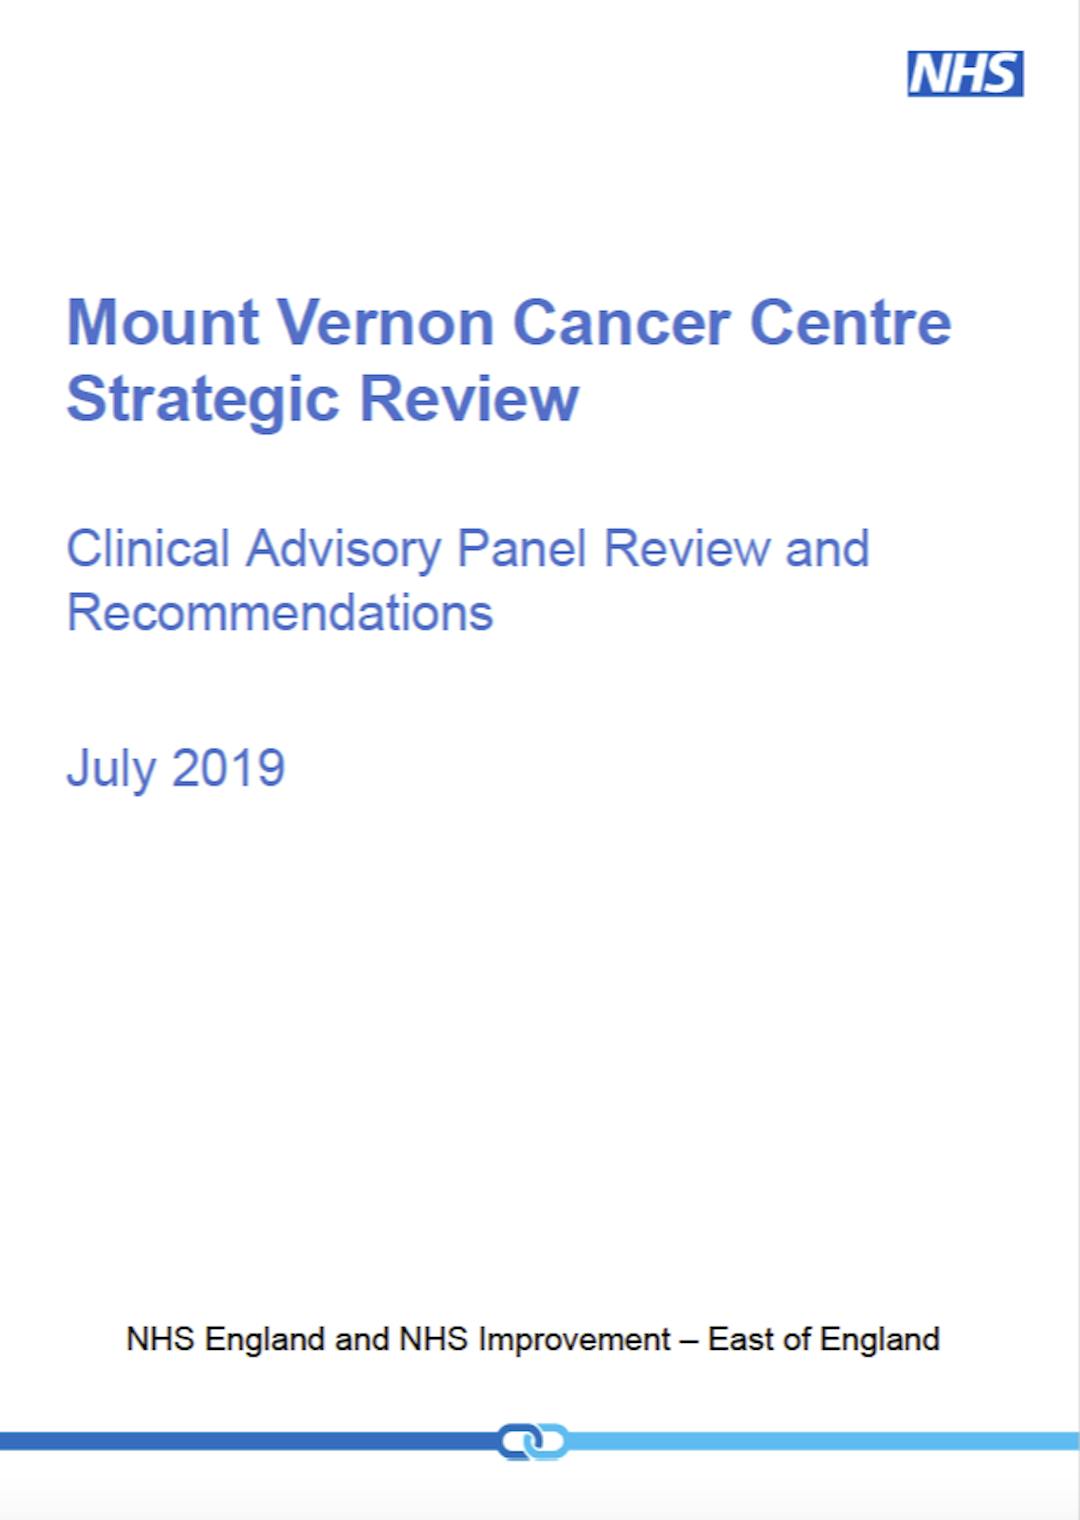 Image of the Mount Vernon Cancer Centre strategic review cover